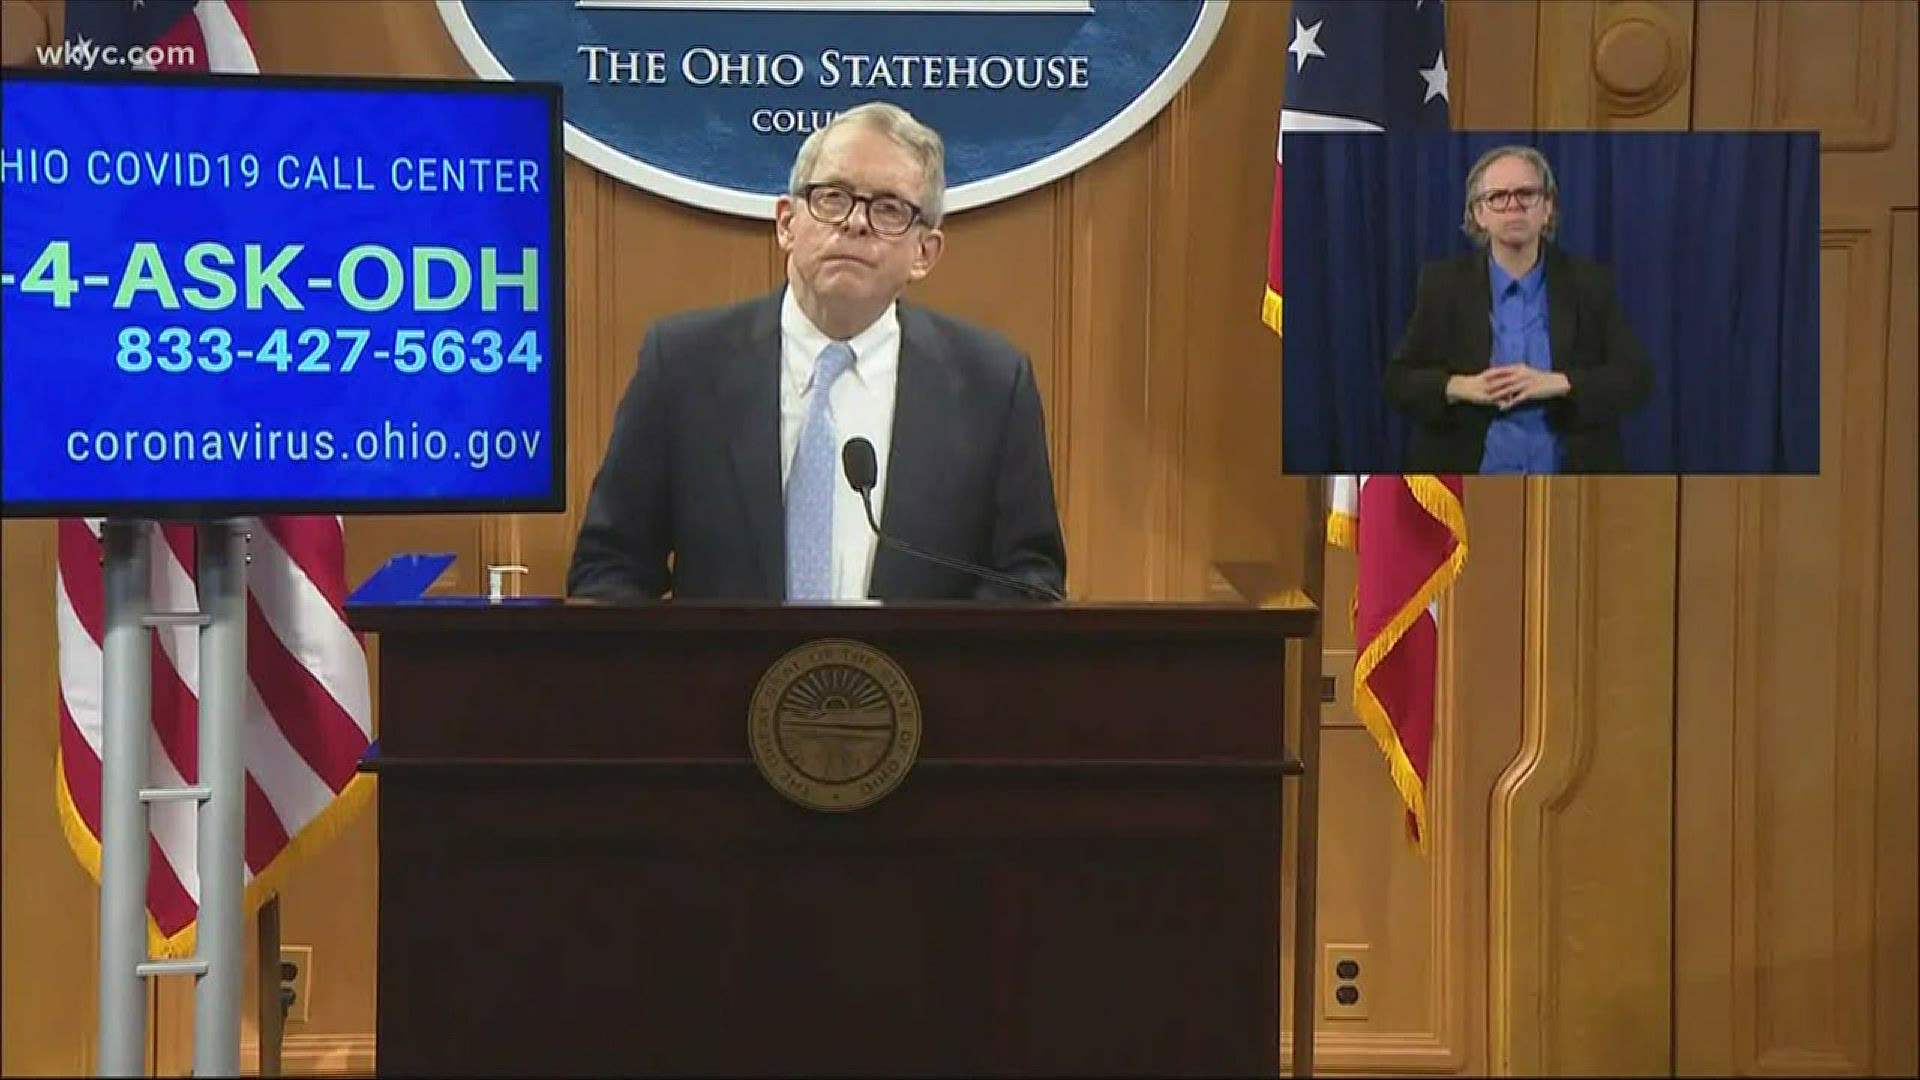 On Thursday, Ohio Governor Mike DeWine said that the state is at the 'end of the beginning' of its fight with the coronavirus. Monica Robins reports.